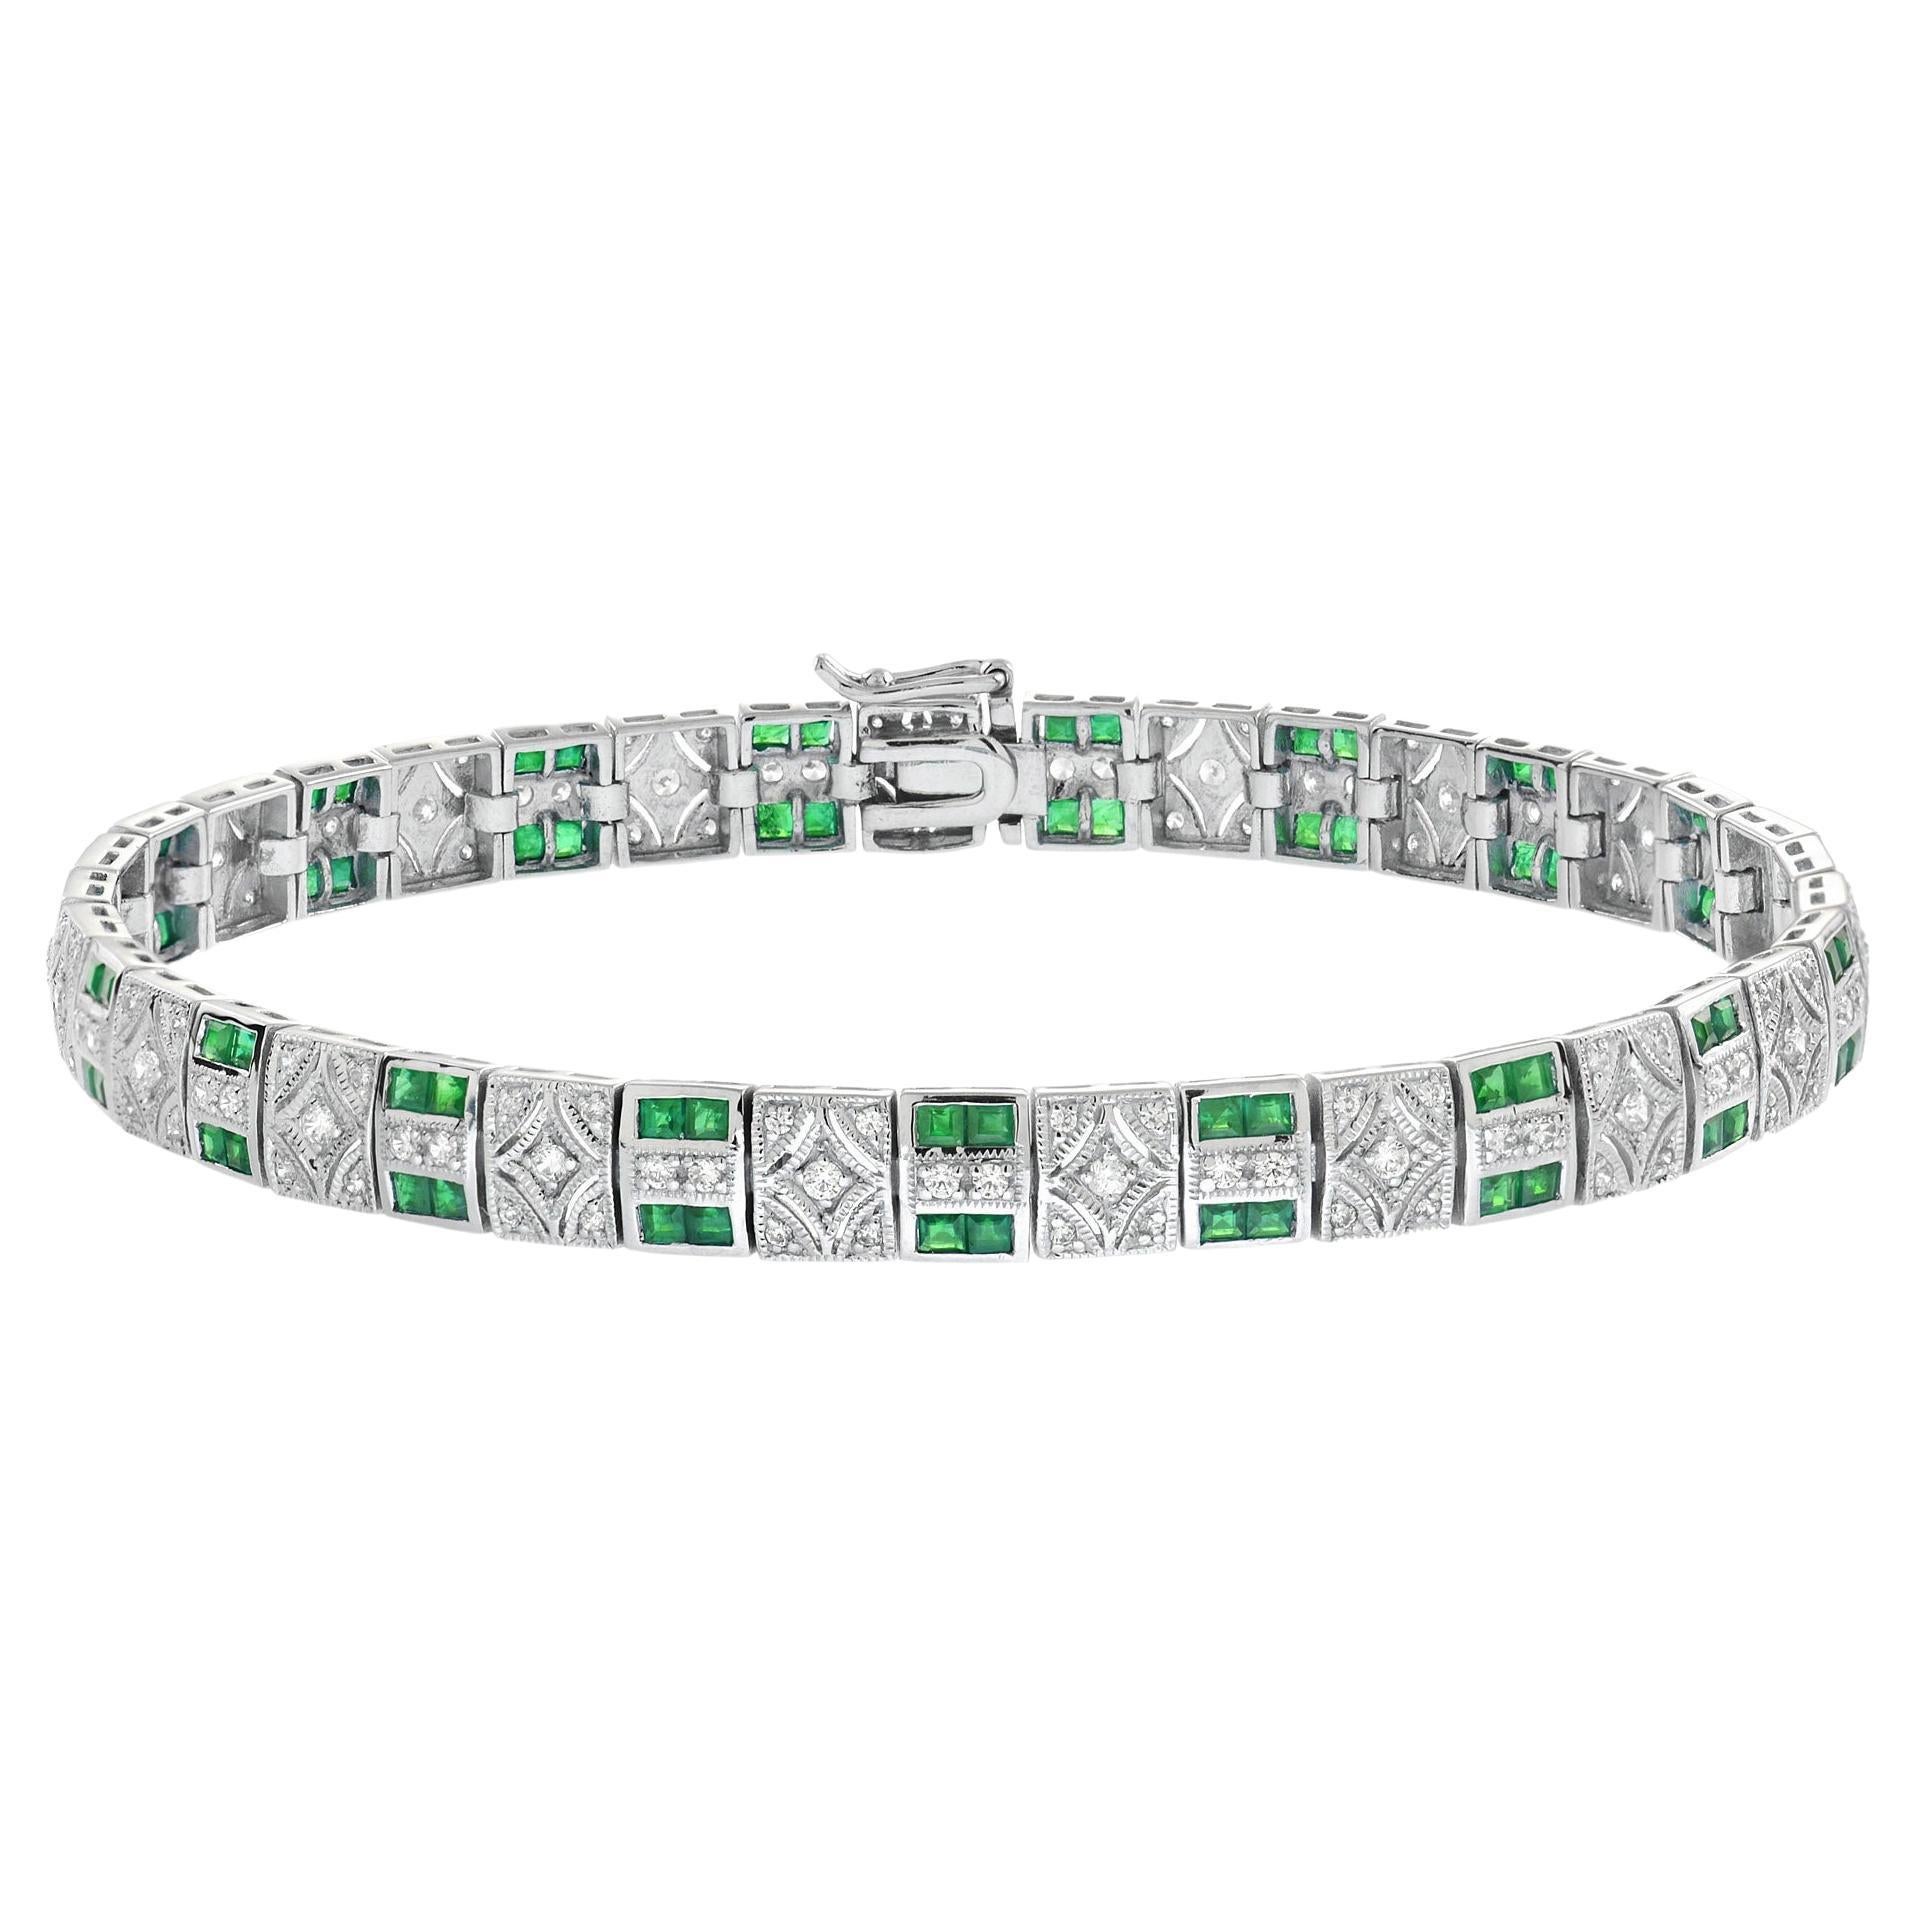 French Cut Emerald and Diamond Art Deco Style Link Bracelet in 18K White Gold